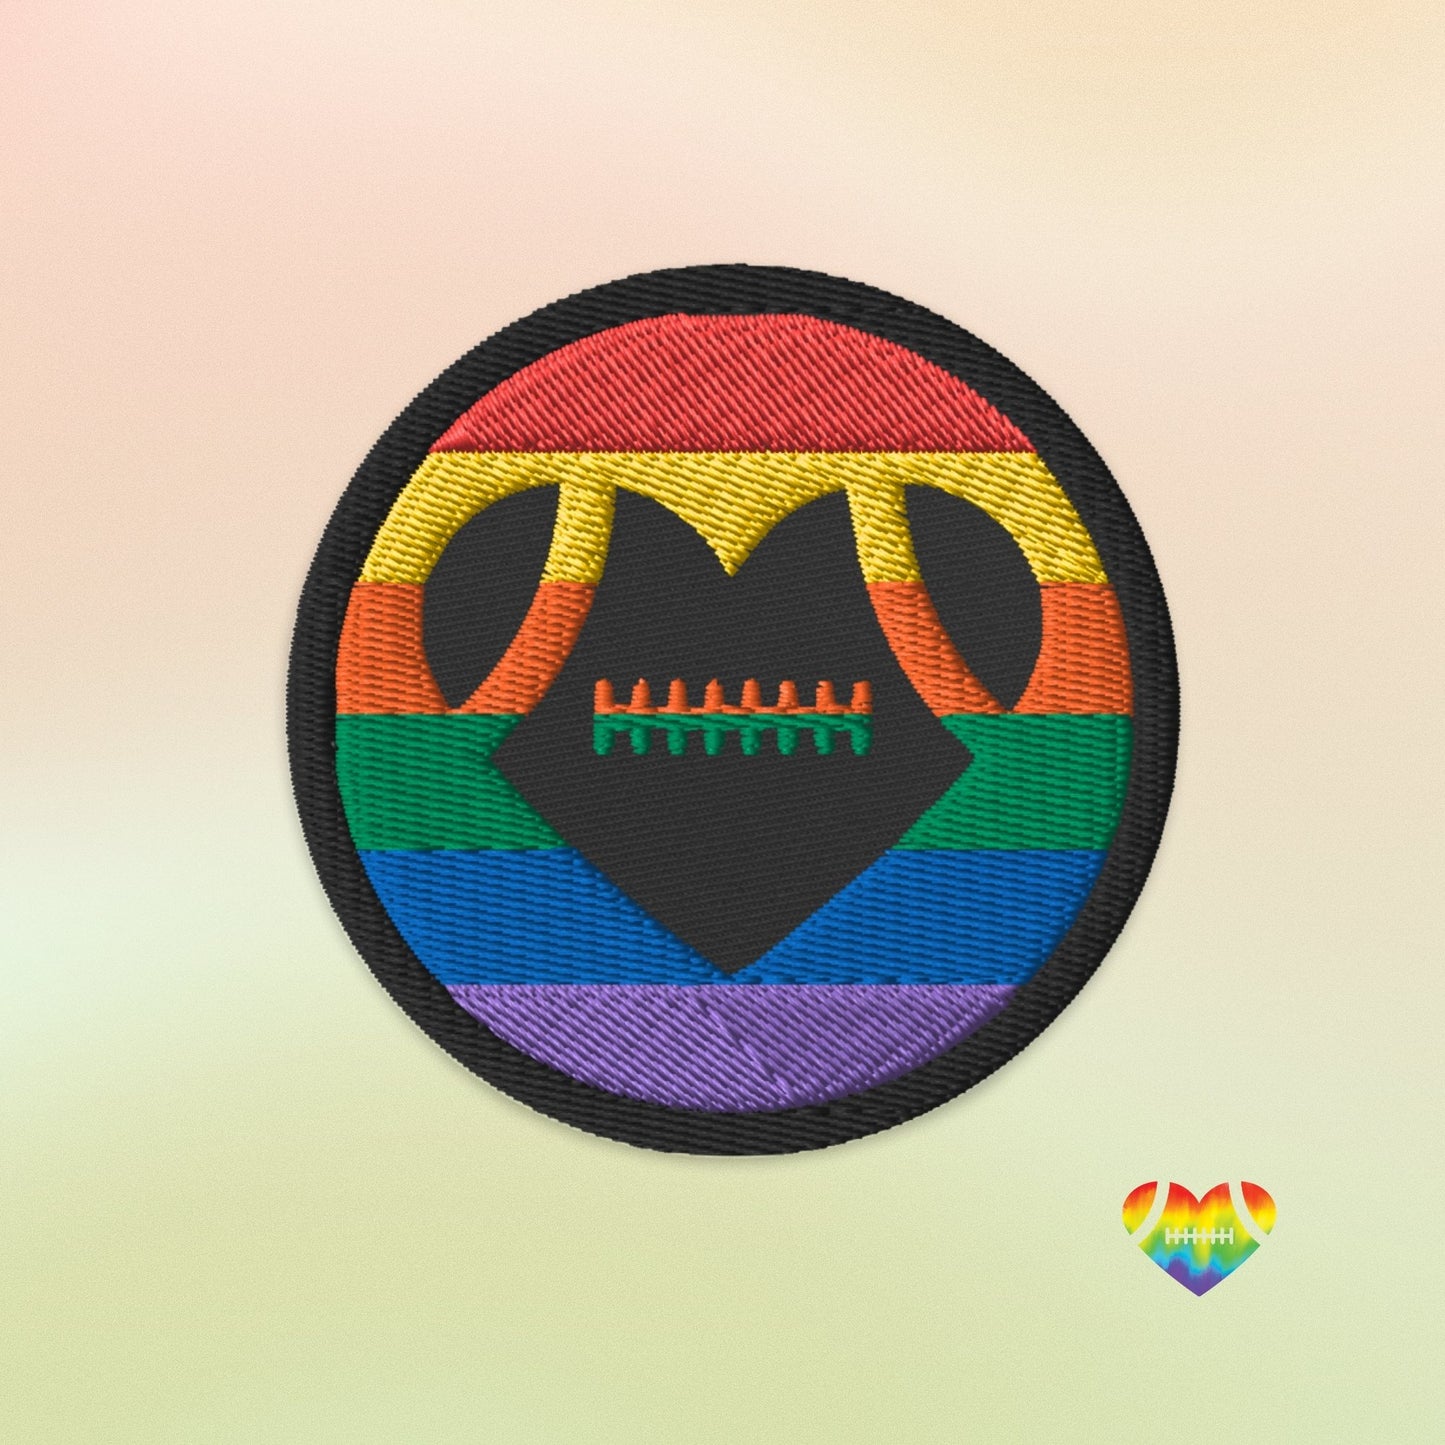 AFA PRIDE HEART CIRCLE Embroidered patches